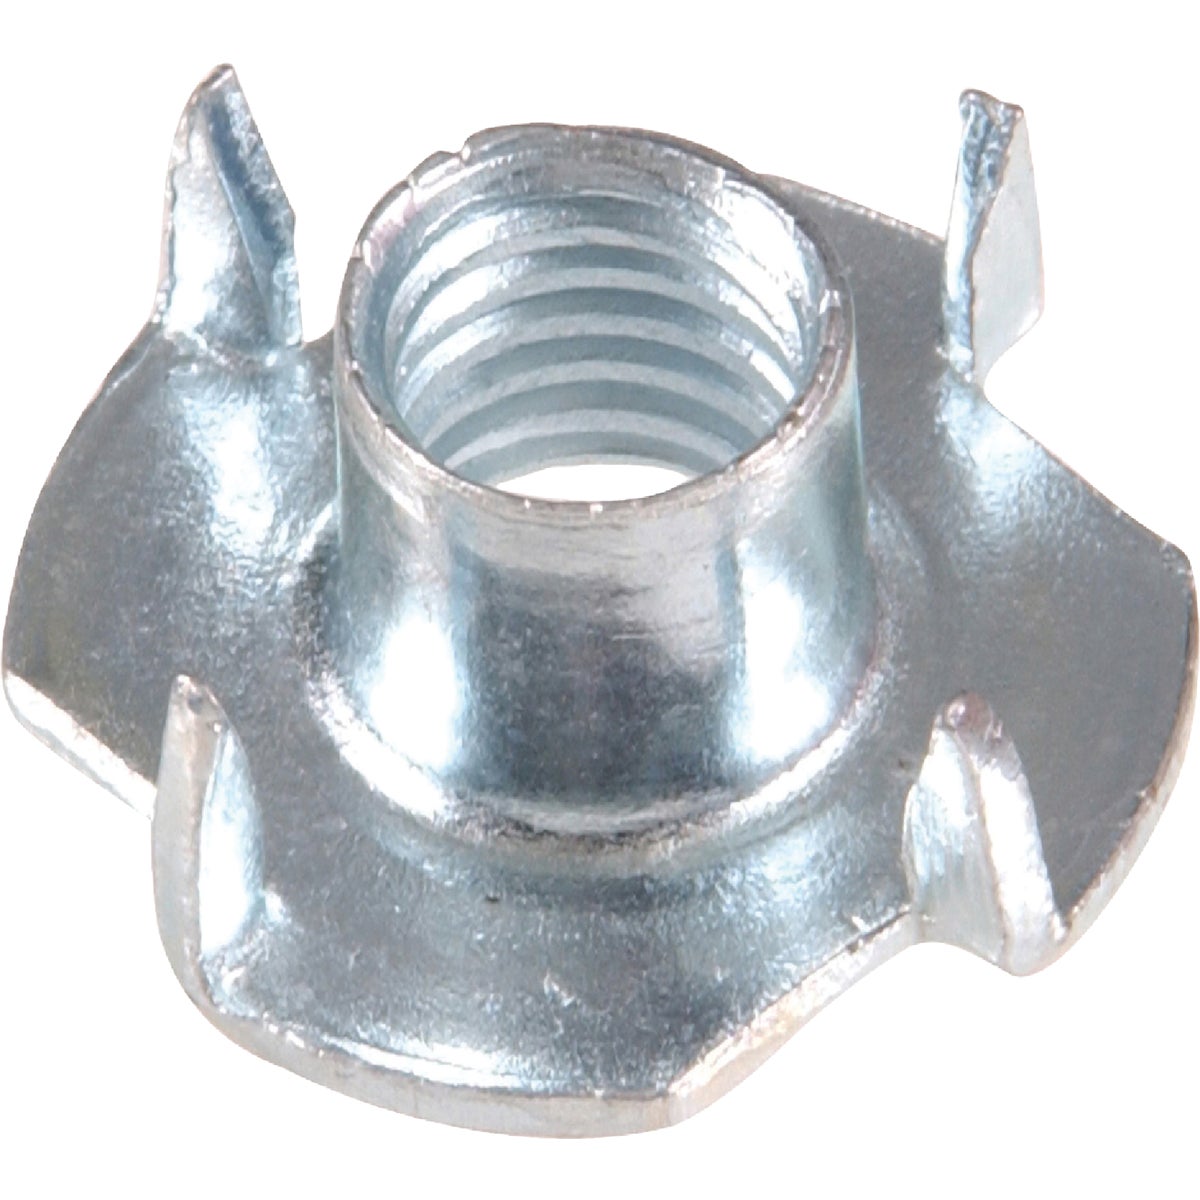 Item 719459, Steel, zinc plated T-nut has a long thin body with a flange at 1 end, 